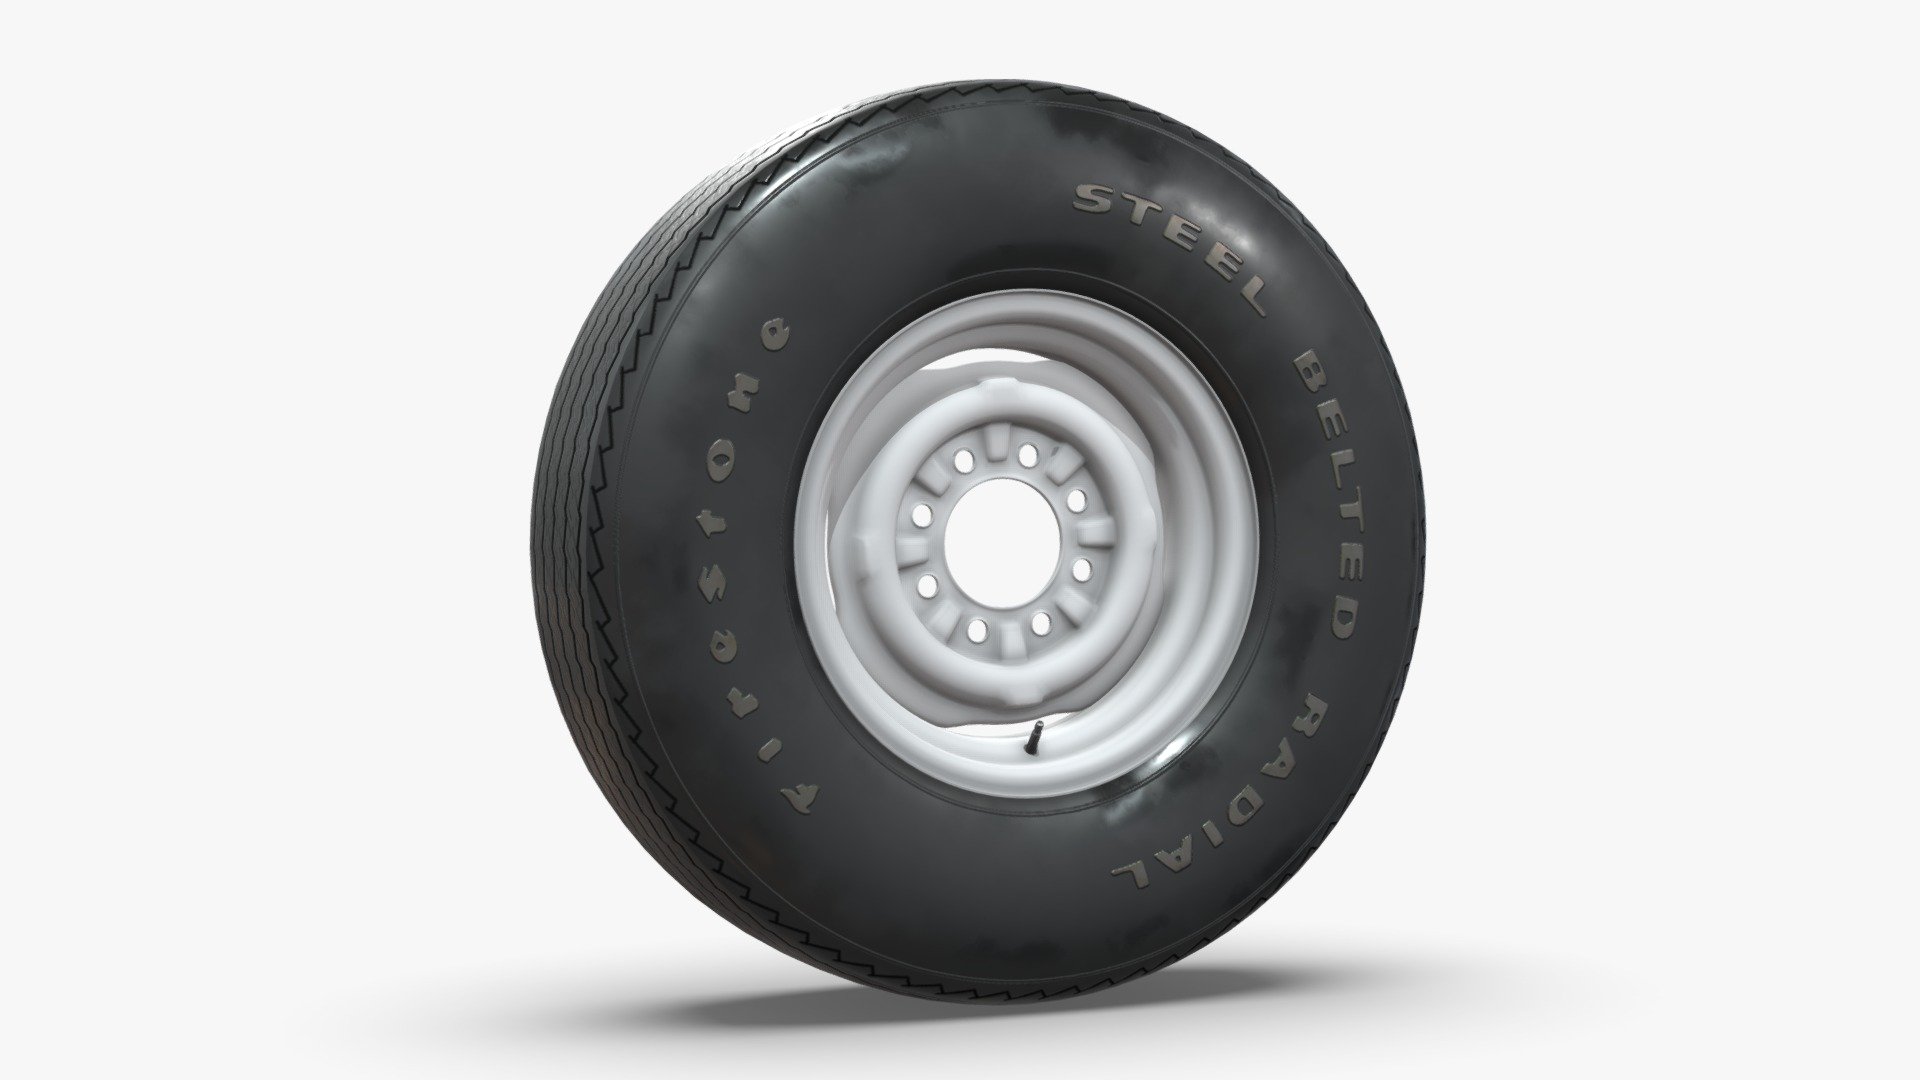 NNAVAS 3D store.

3D model of a wheel and tire set for a vintage pickup truck.

The model is fully textured and was created with 3DS Max 2016 using the open subdivision modifier which has been left in the stack.

The model has 3.922 polygons with subdivision level at 0 and 15.672 at level 1.

FBX, OBJ and 3DS files have been included in separated HI and LO subdivision versions.

Renderer: V Ray.

MATERIALS AND TEXTURES:

All materials and textures are included and mapped in all files, settings might have to be adjusted depending on the software you are using. 

JPG textures have 2048 x 2048 resolution 3d model